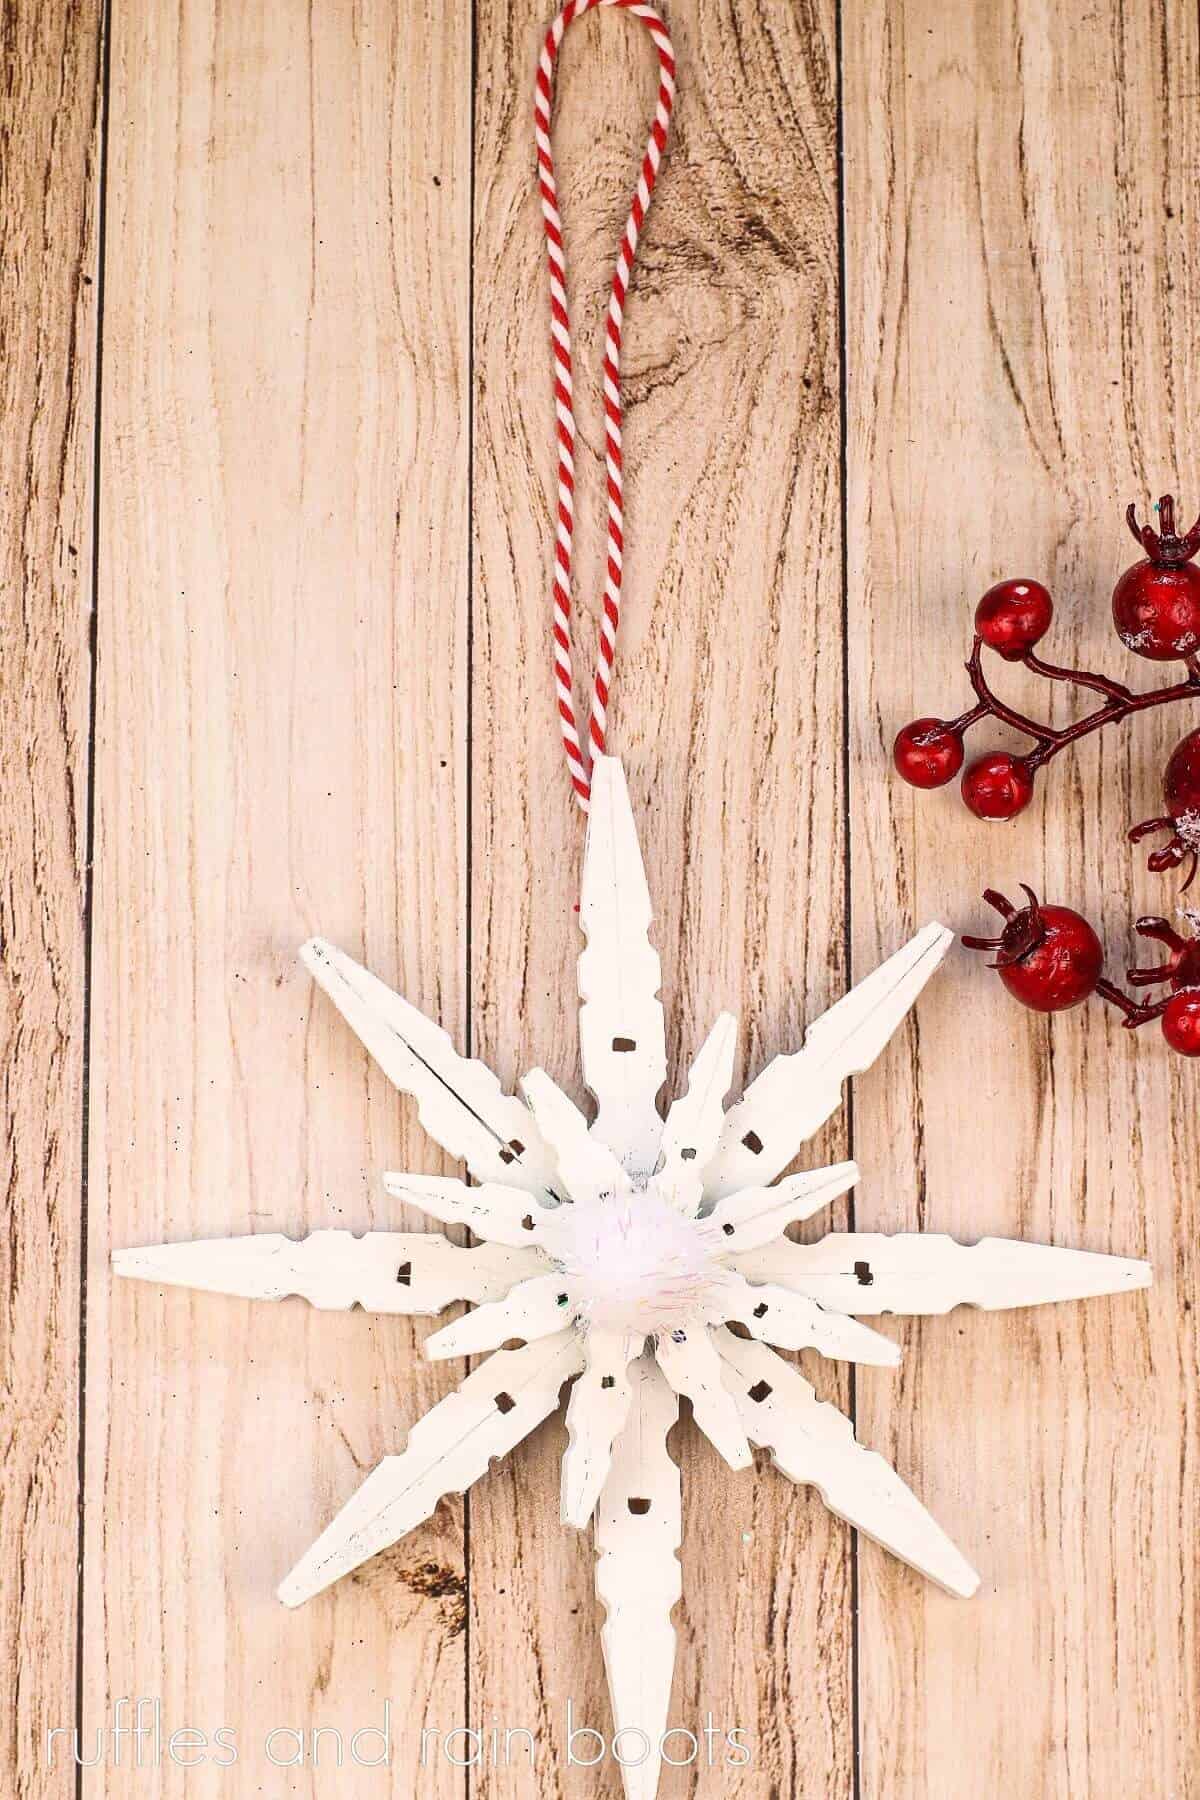 V White layered wooden clothespin snowflake ornament on a wooden surface next to red holiday decor.